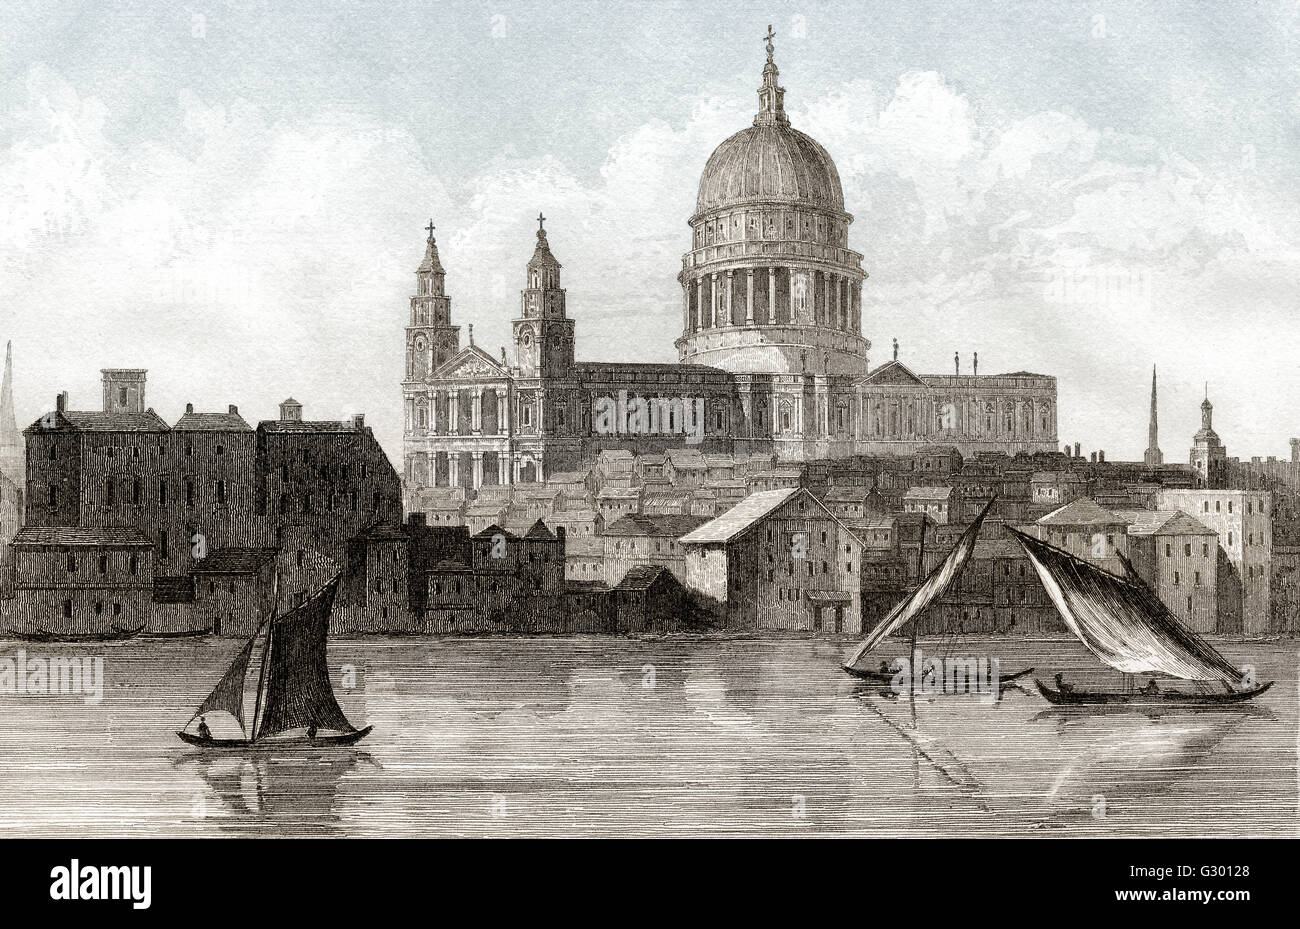 View of St Paul's Cathedral, London, 18th century Stock Photo